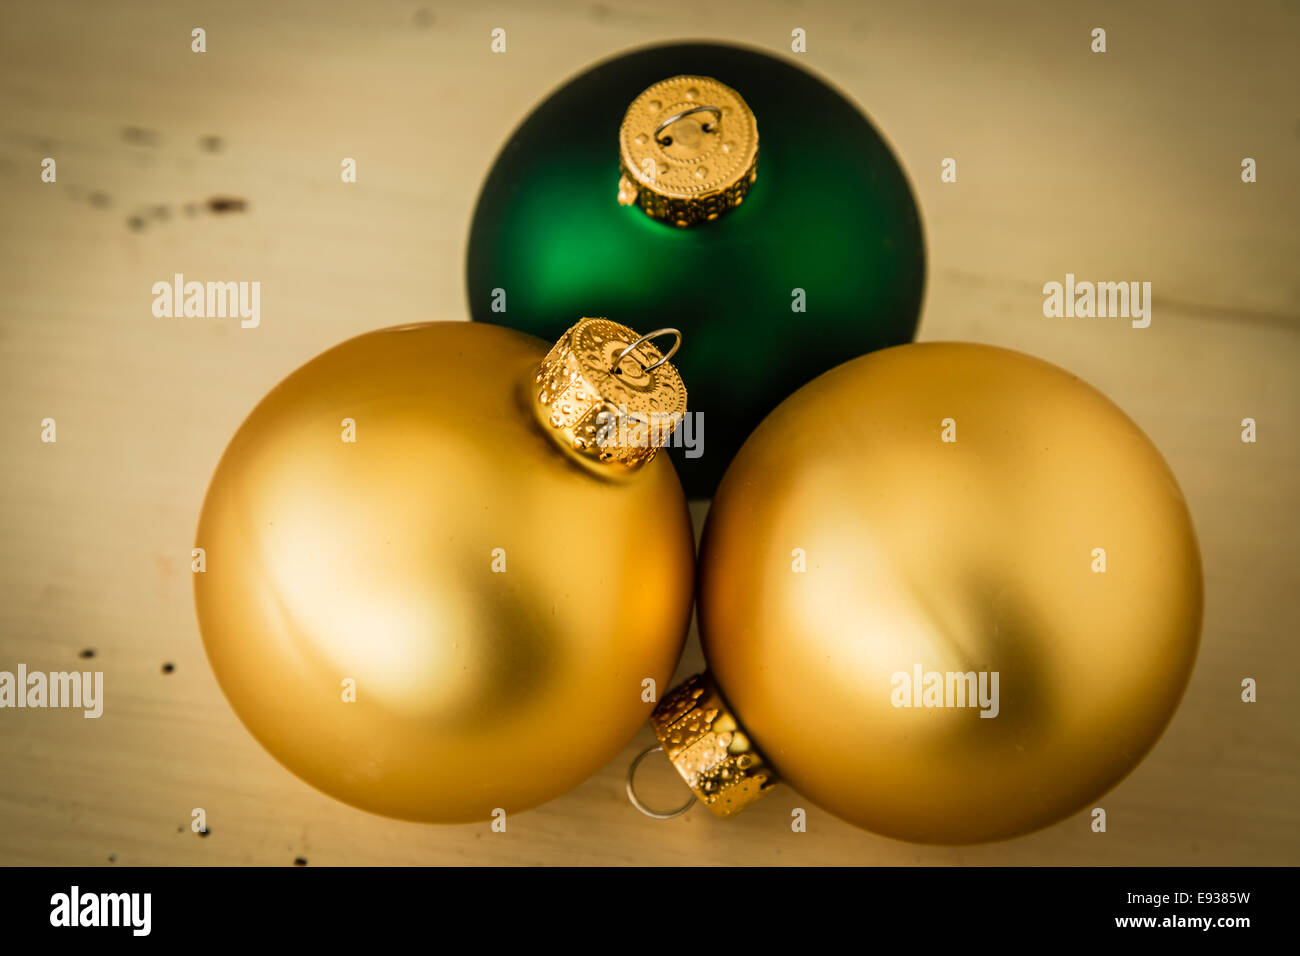 Christmas decorations with retro vintage filter effect. Stock Photo